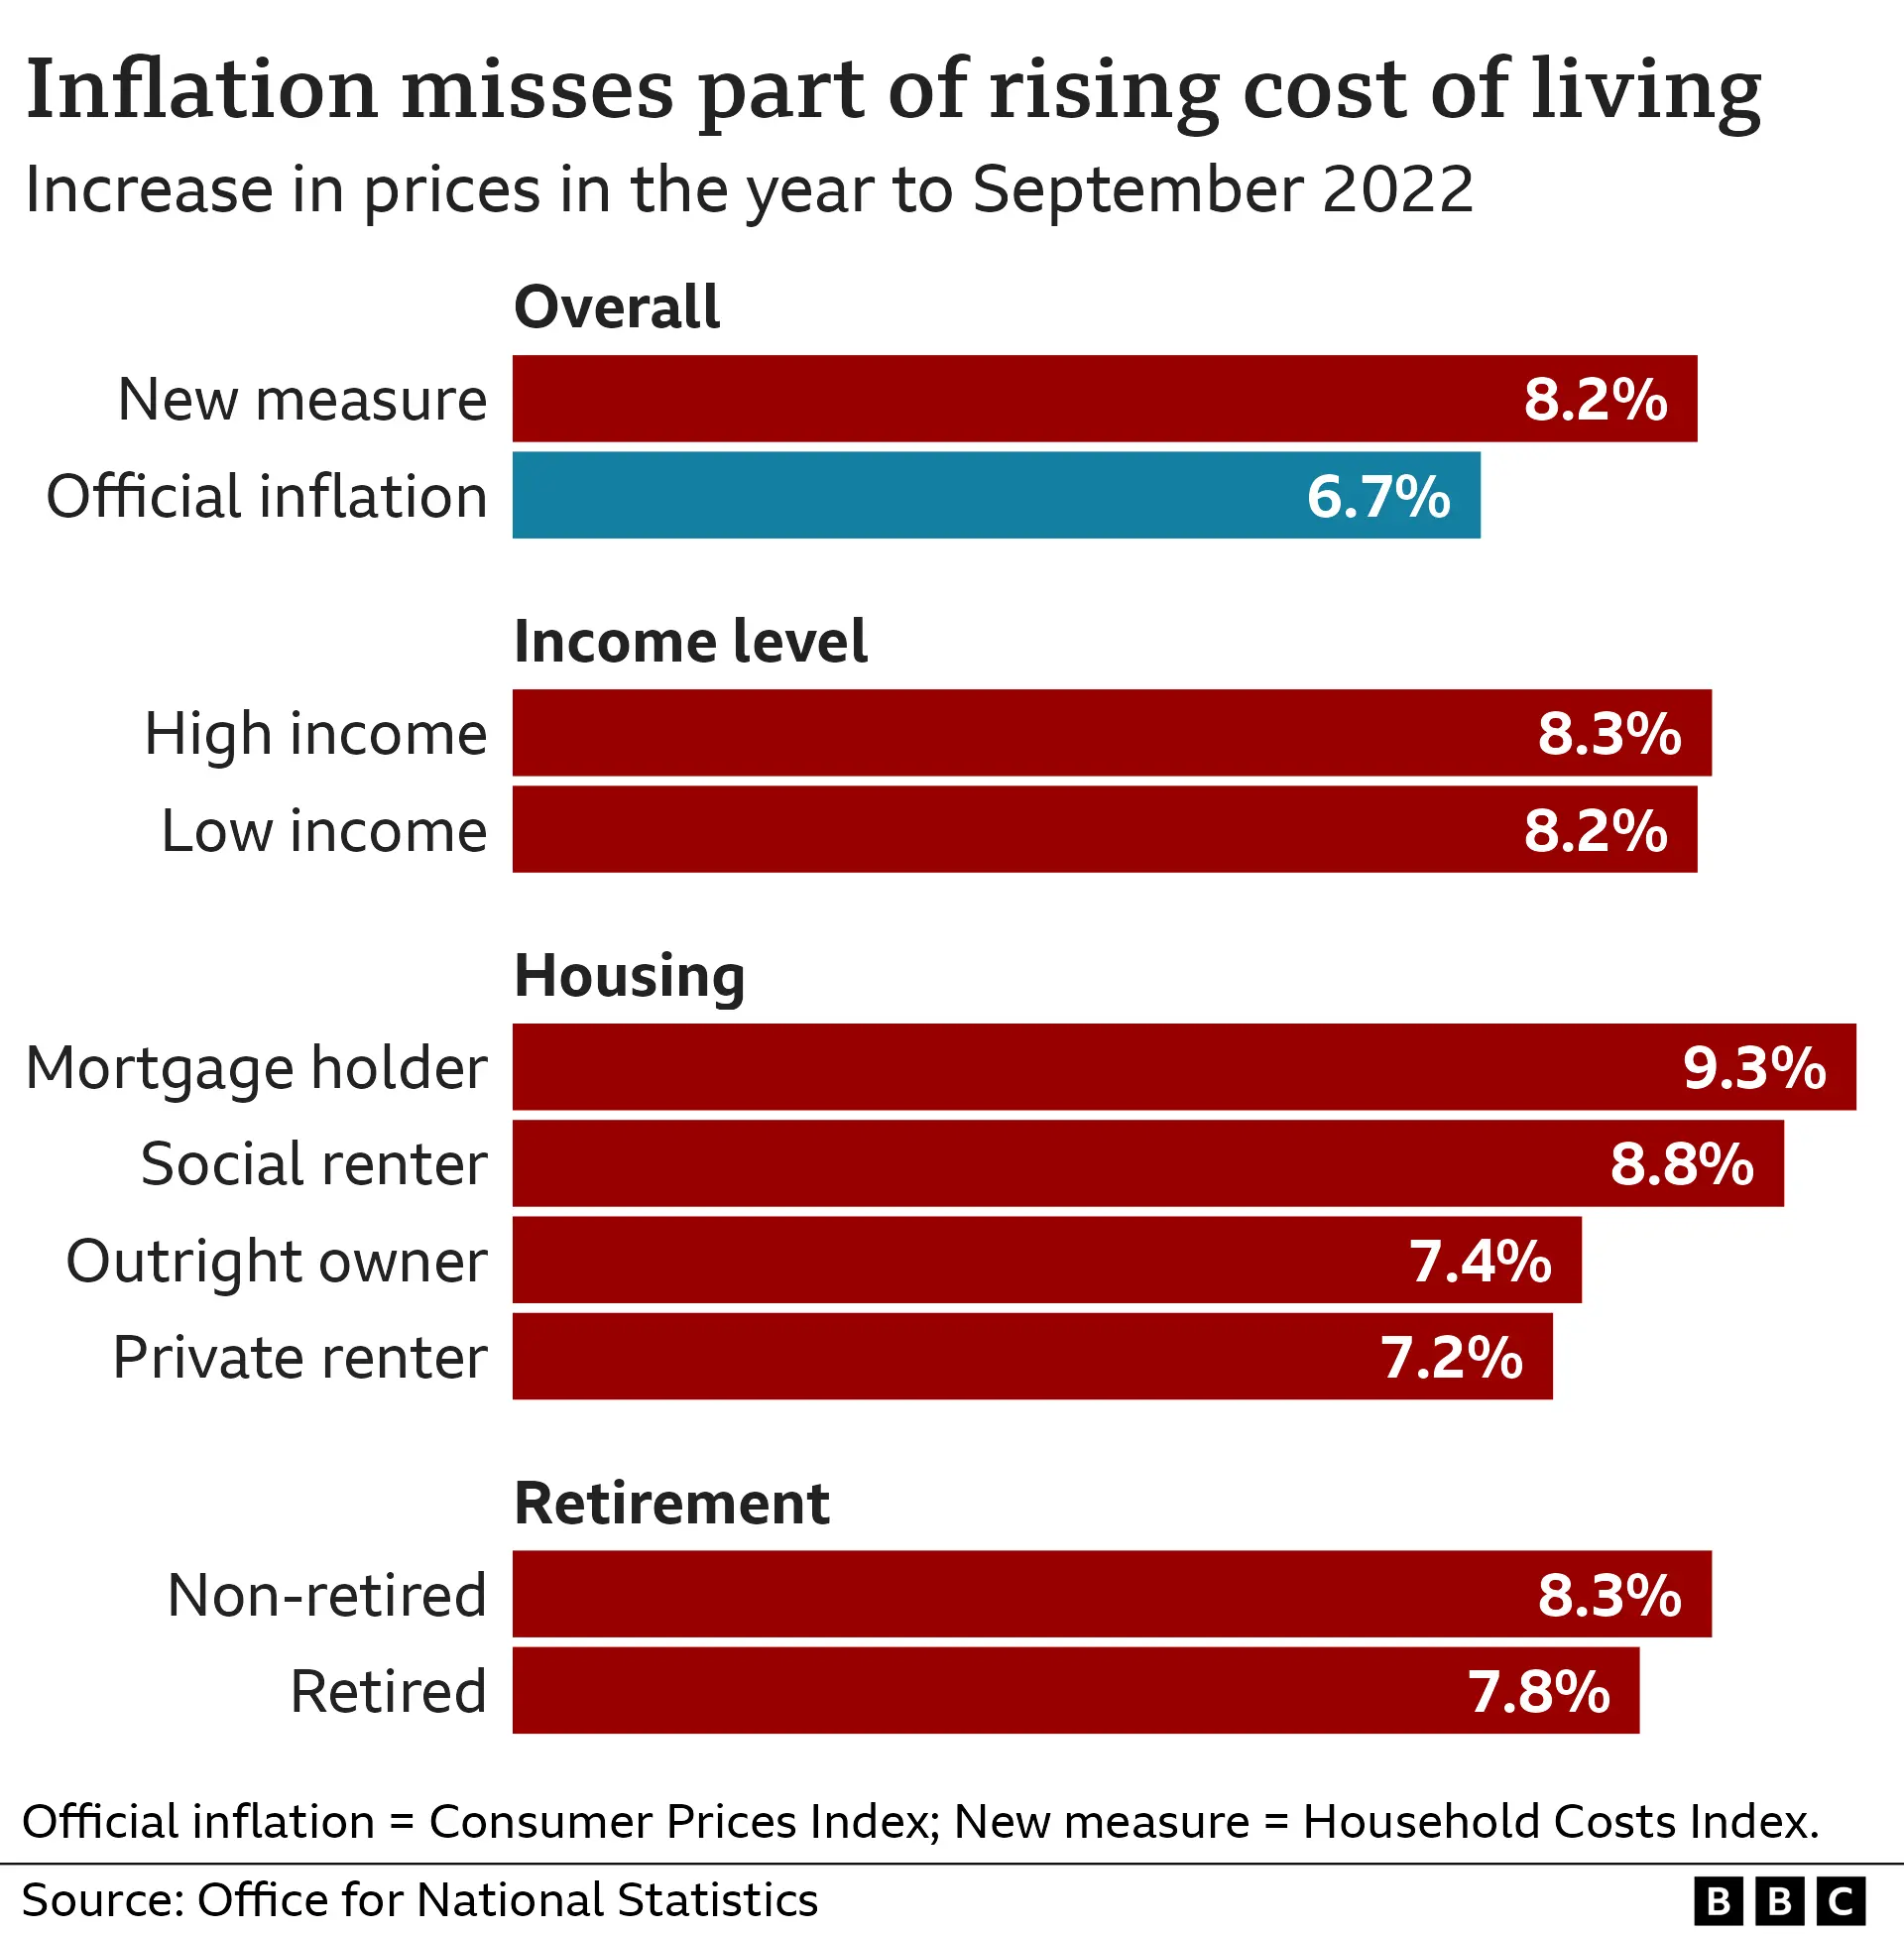 Inflation and Rising Cost of Living